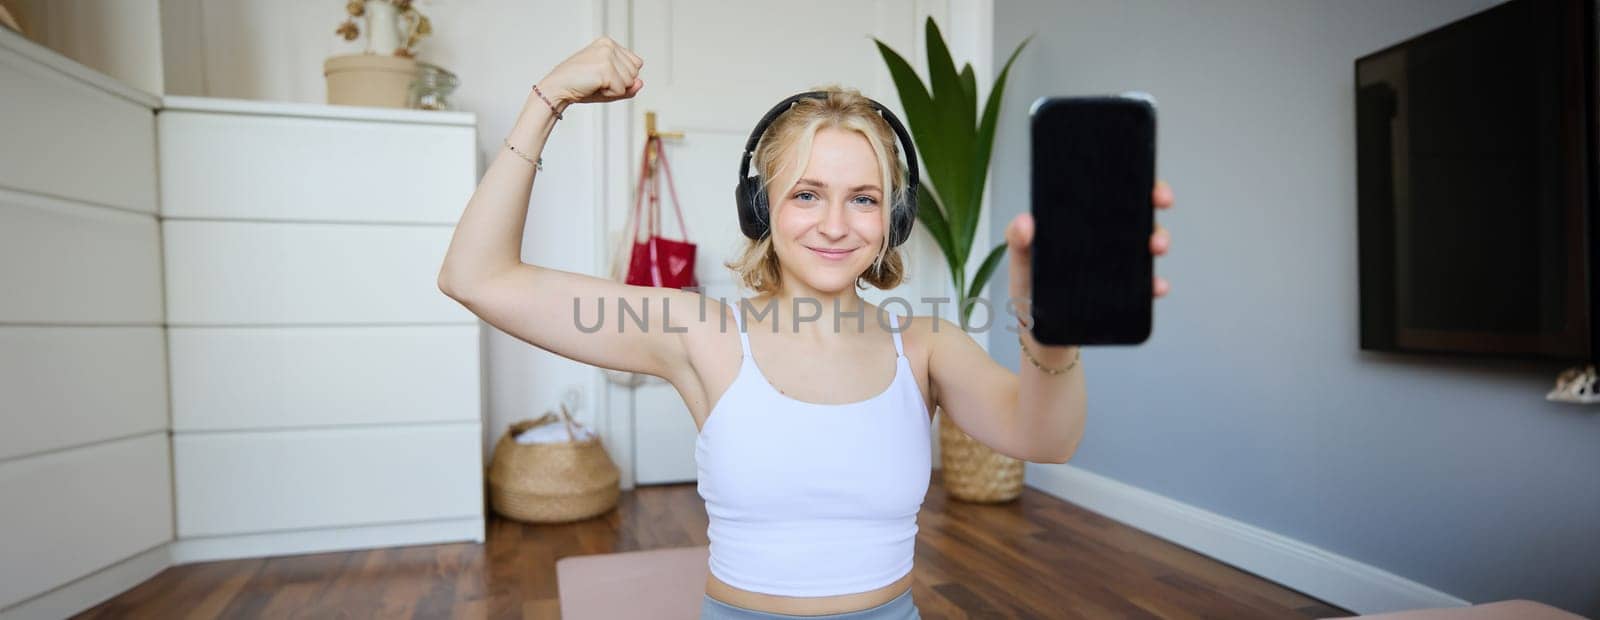 Portrait of beautiful and fit young woman, staying healthy working out at home, showing mobile app, blank screen, flexing biceps, recommending smartphone application for exercises.